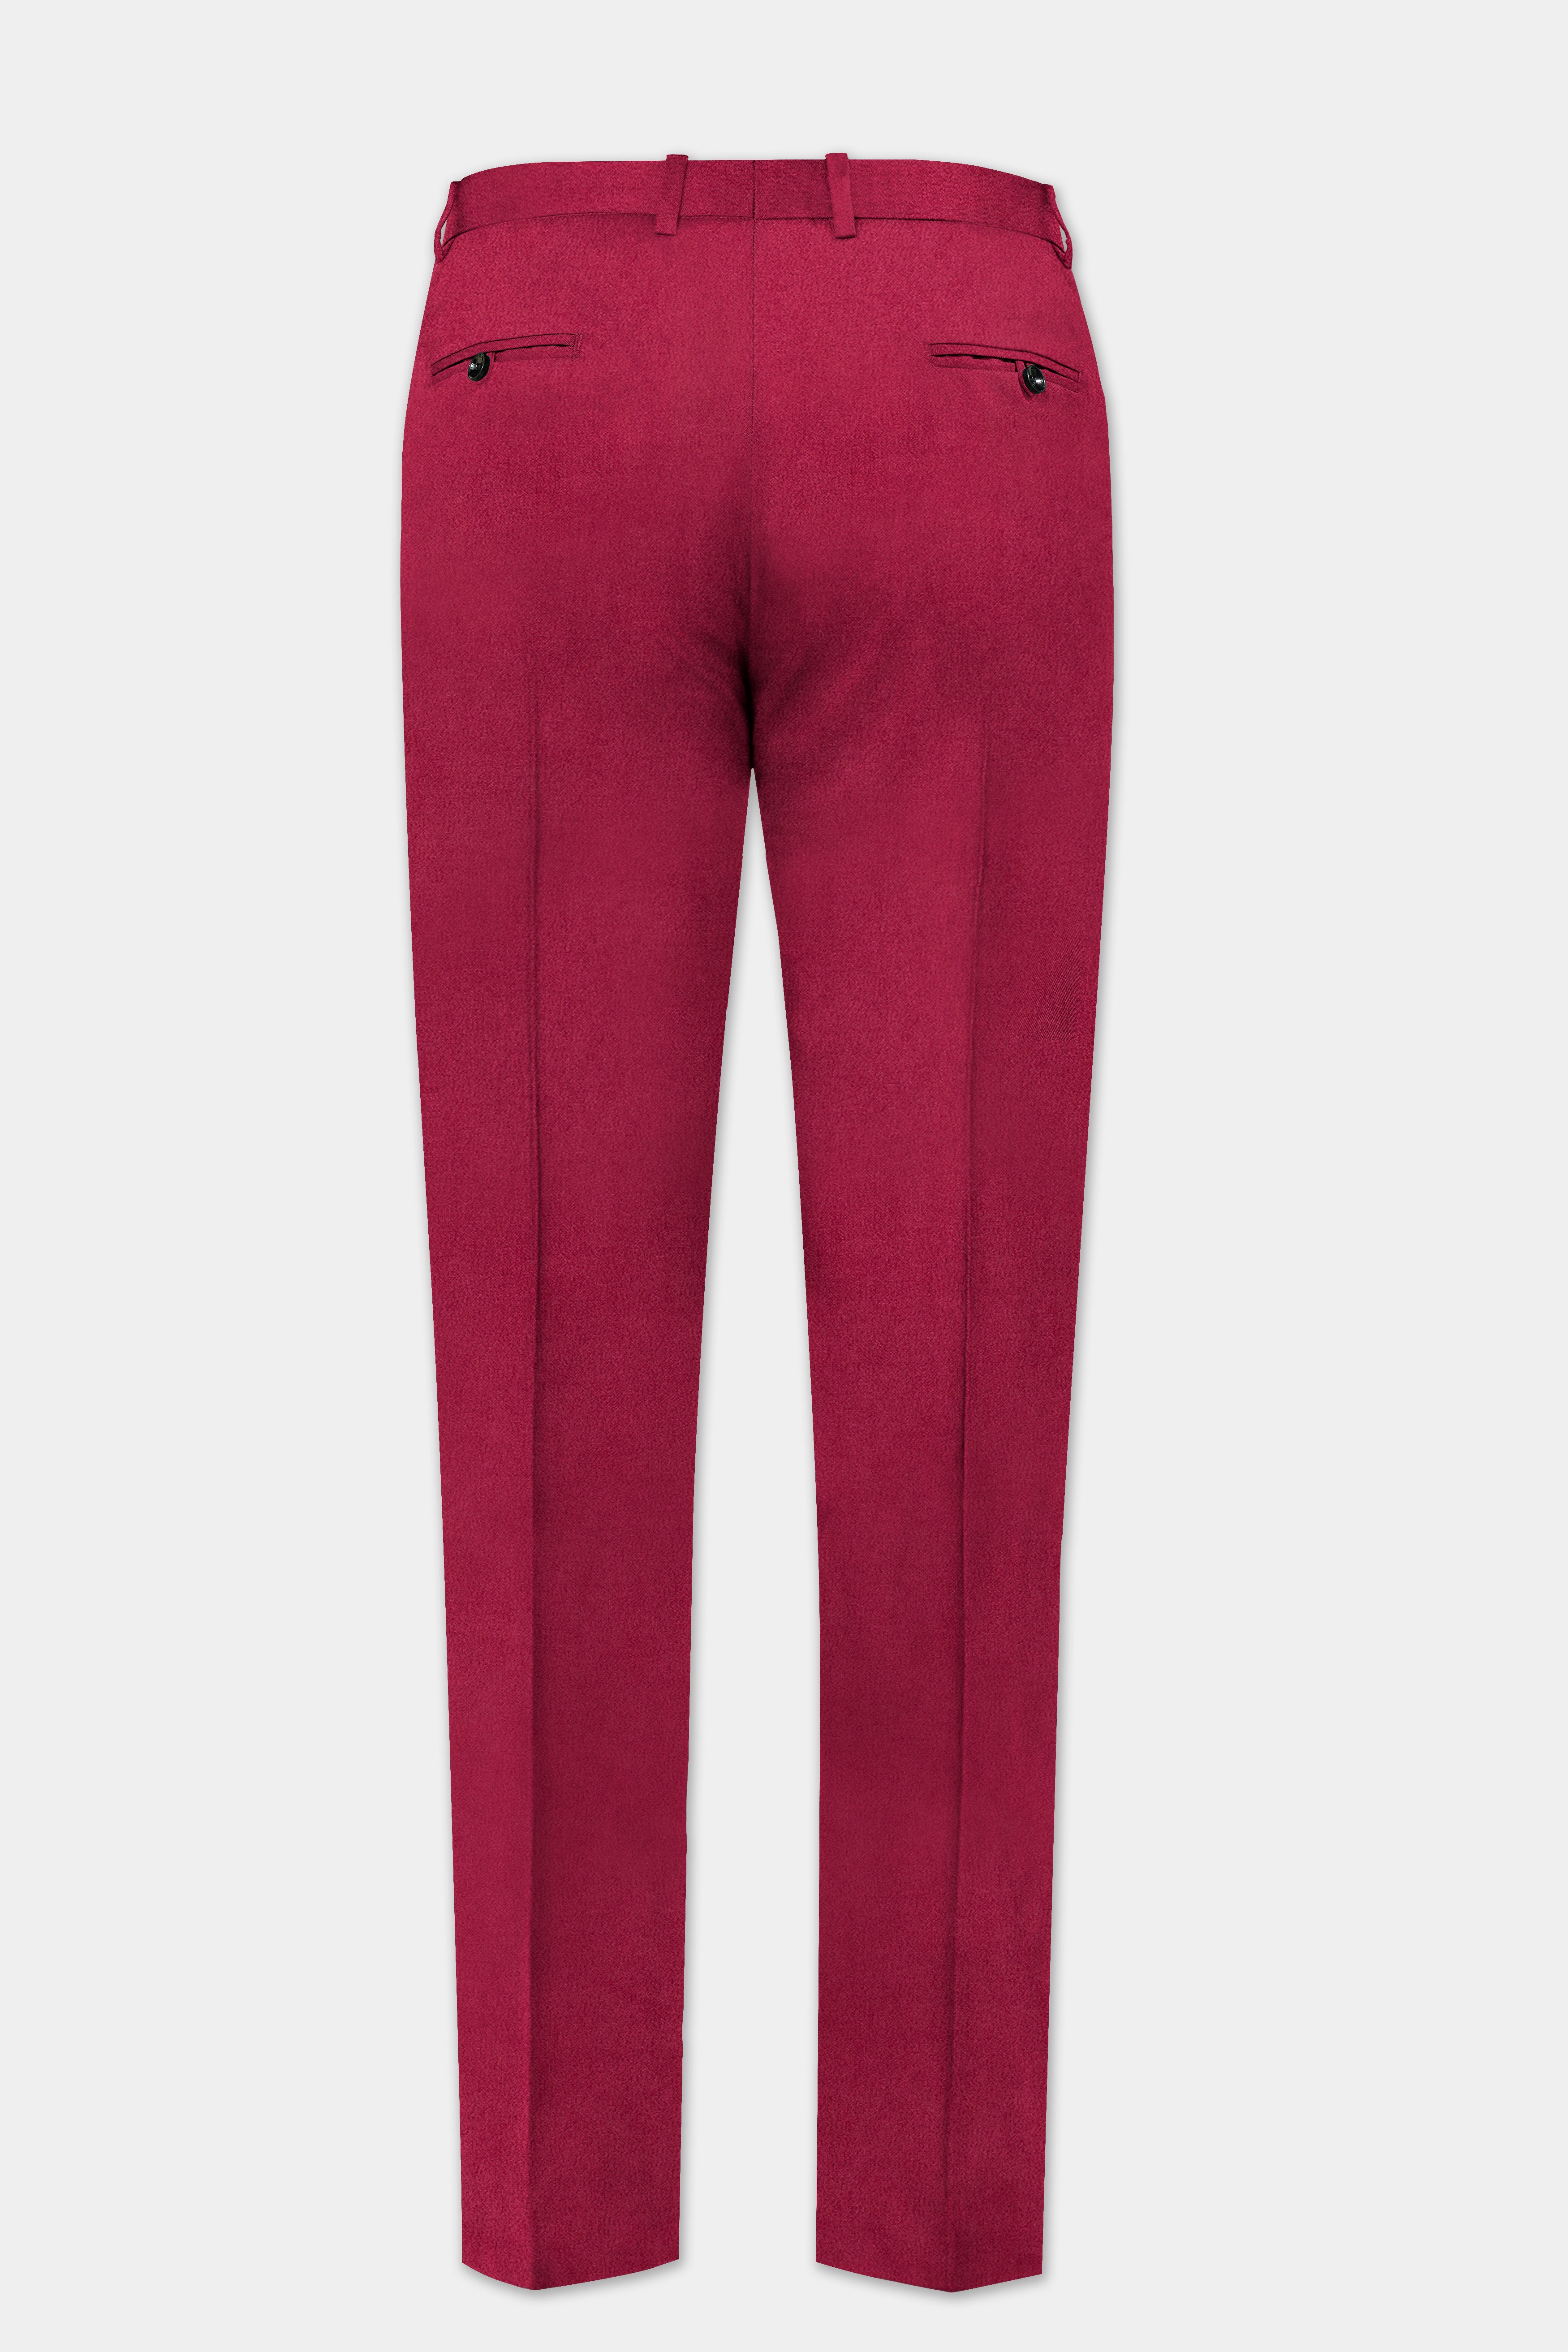 Claret Red Solid Velvet Stretchable Waistband Pant